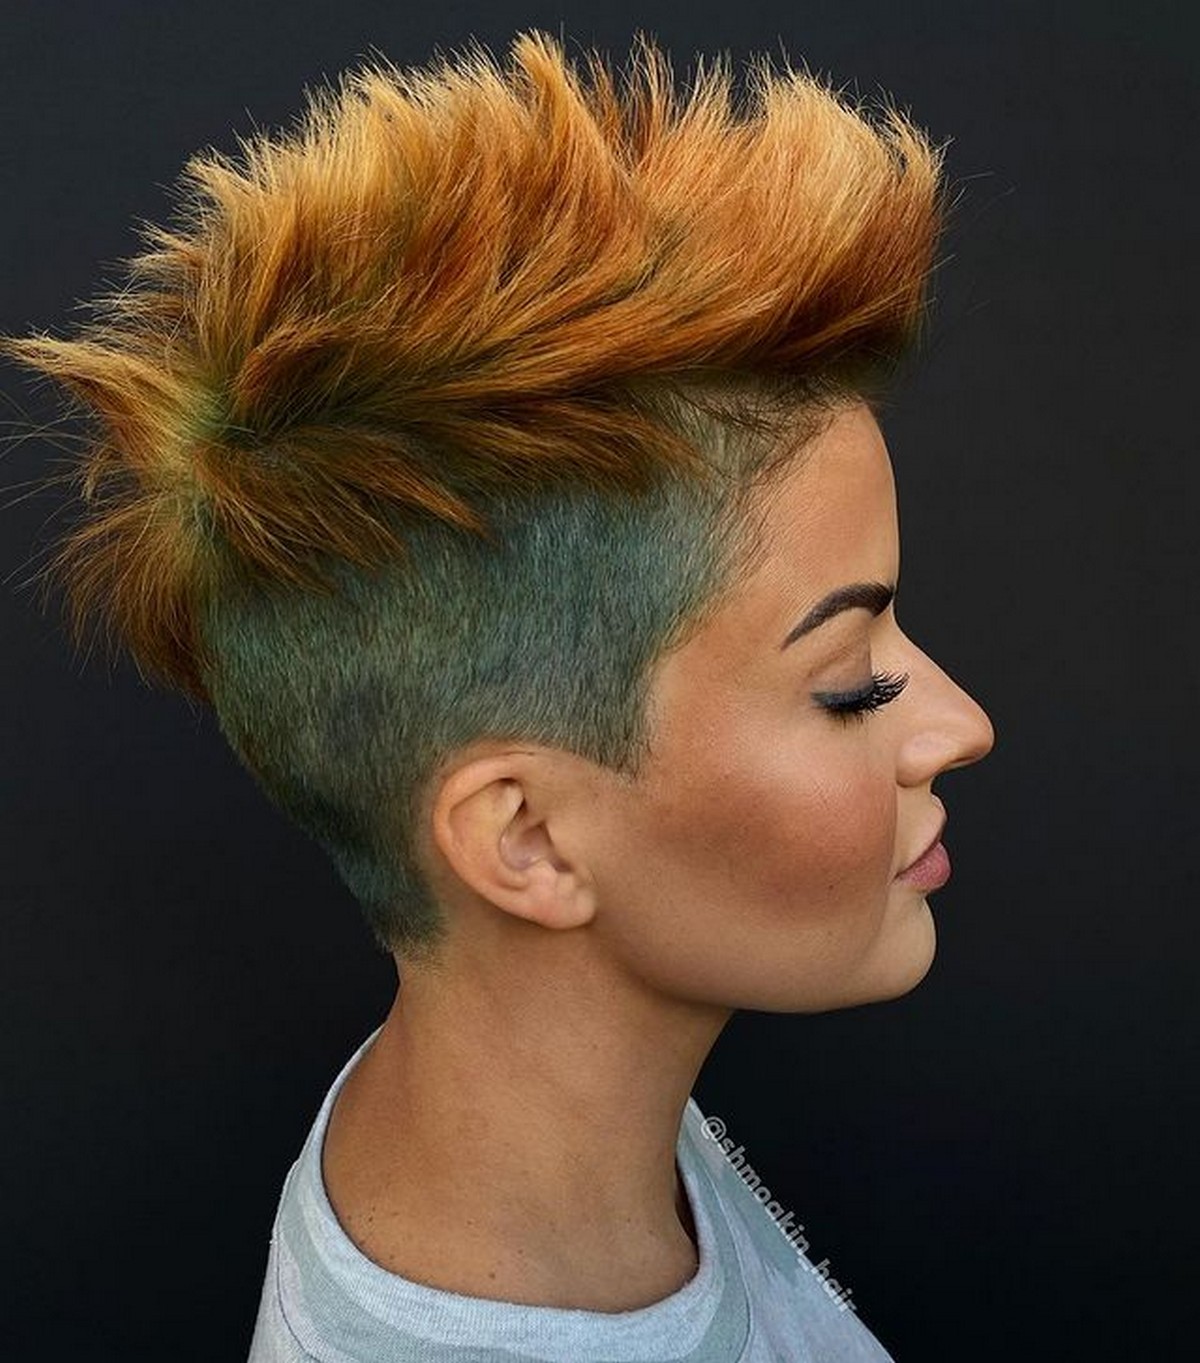 Beauty: Styles For Hair With Shaved Sides - Art Becomes You